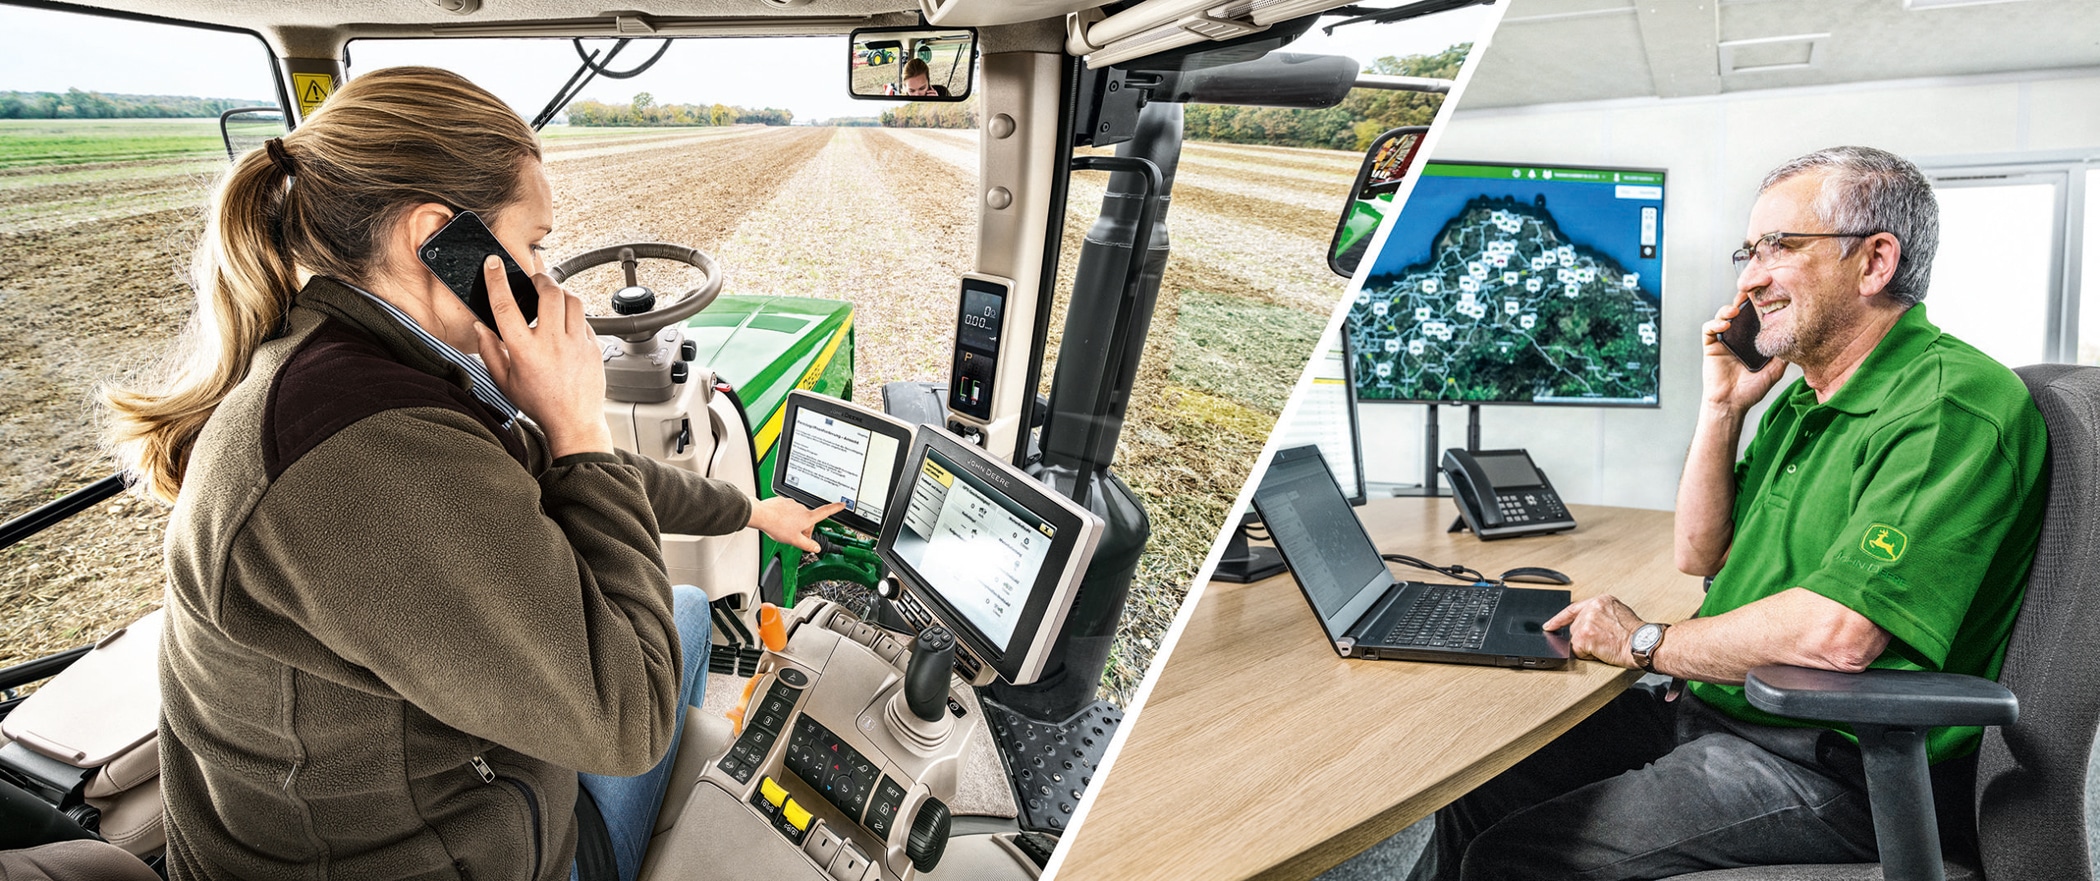 John Deere Connected Support proves its worth